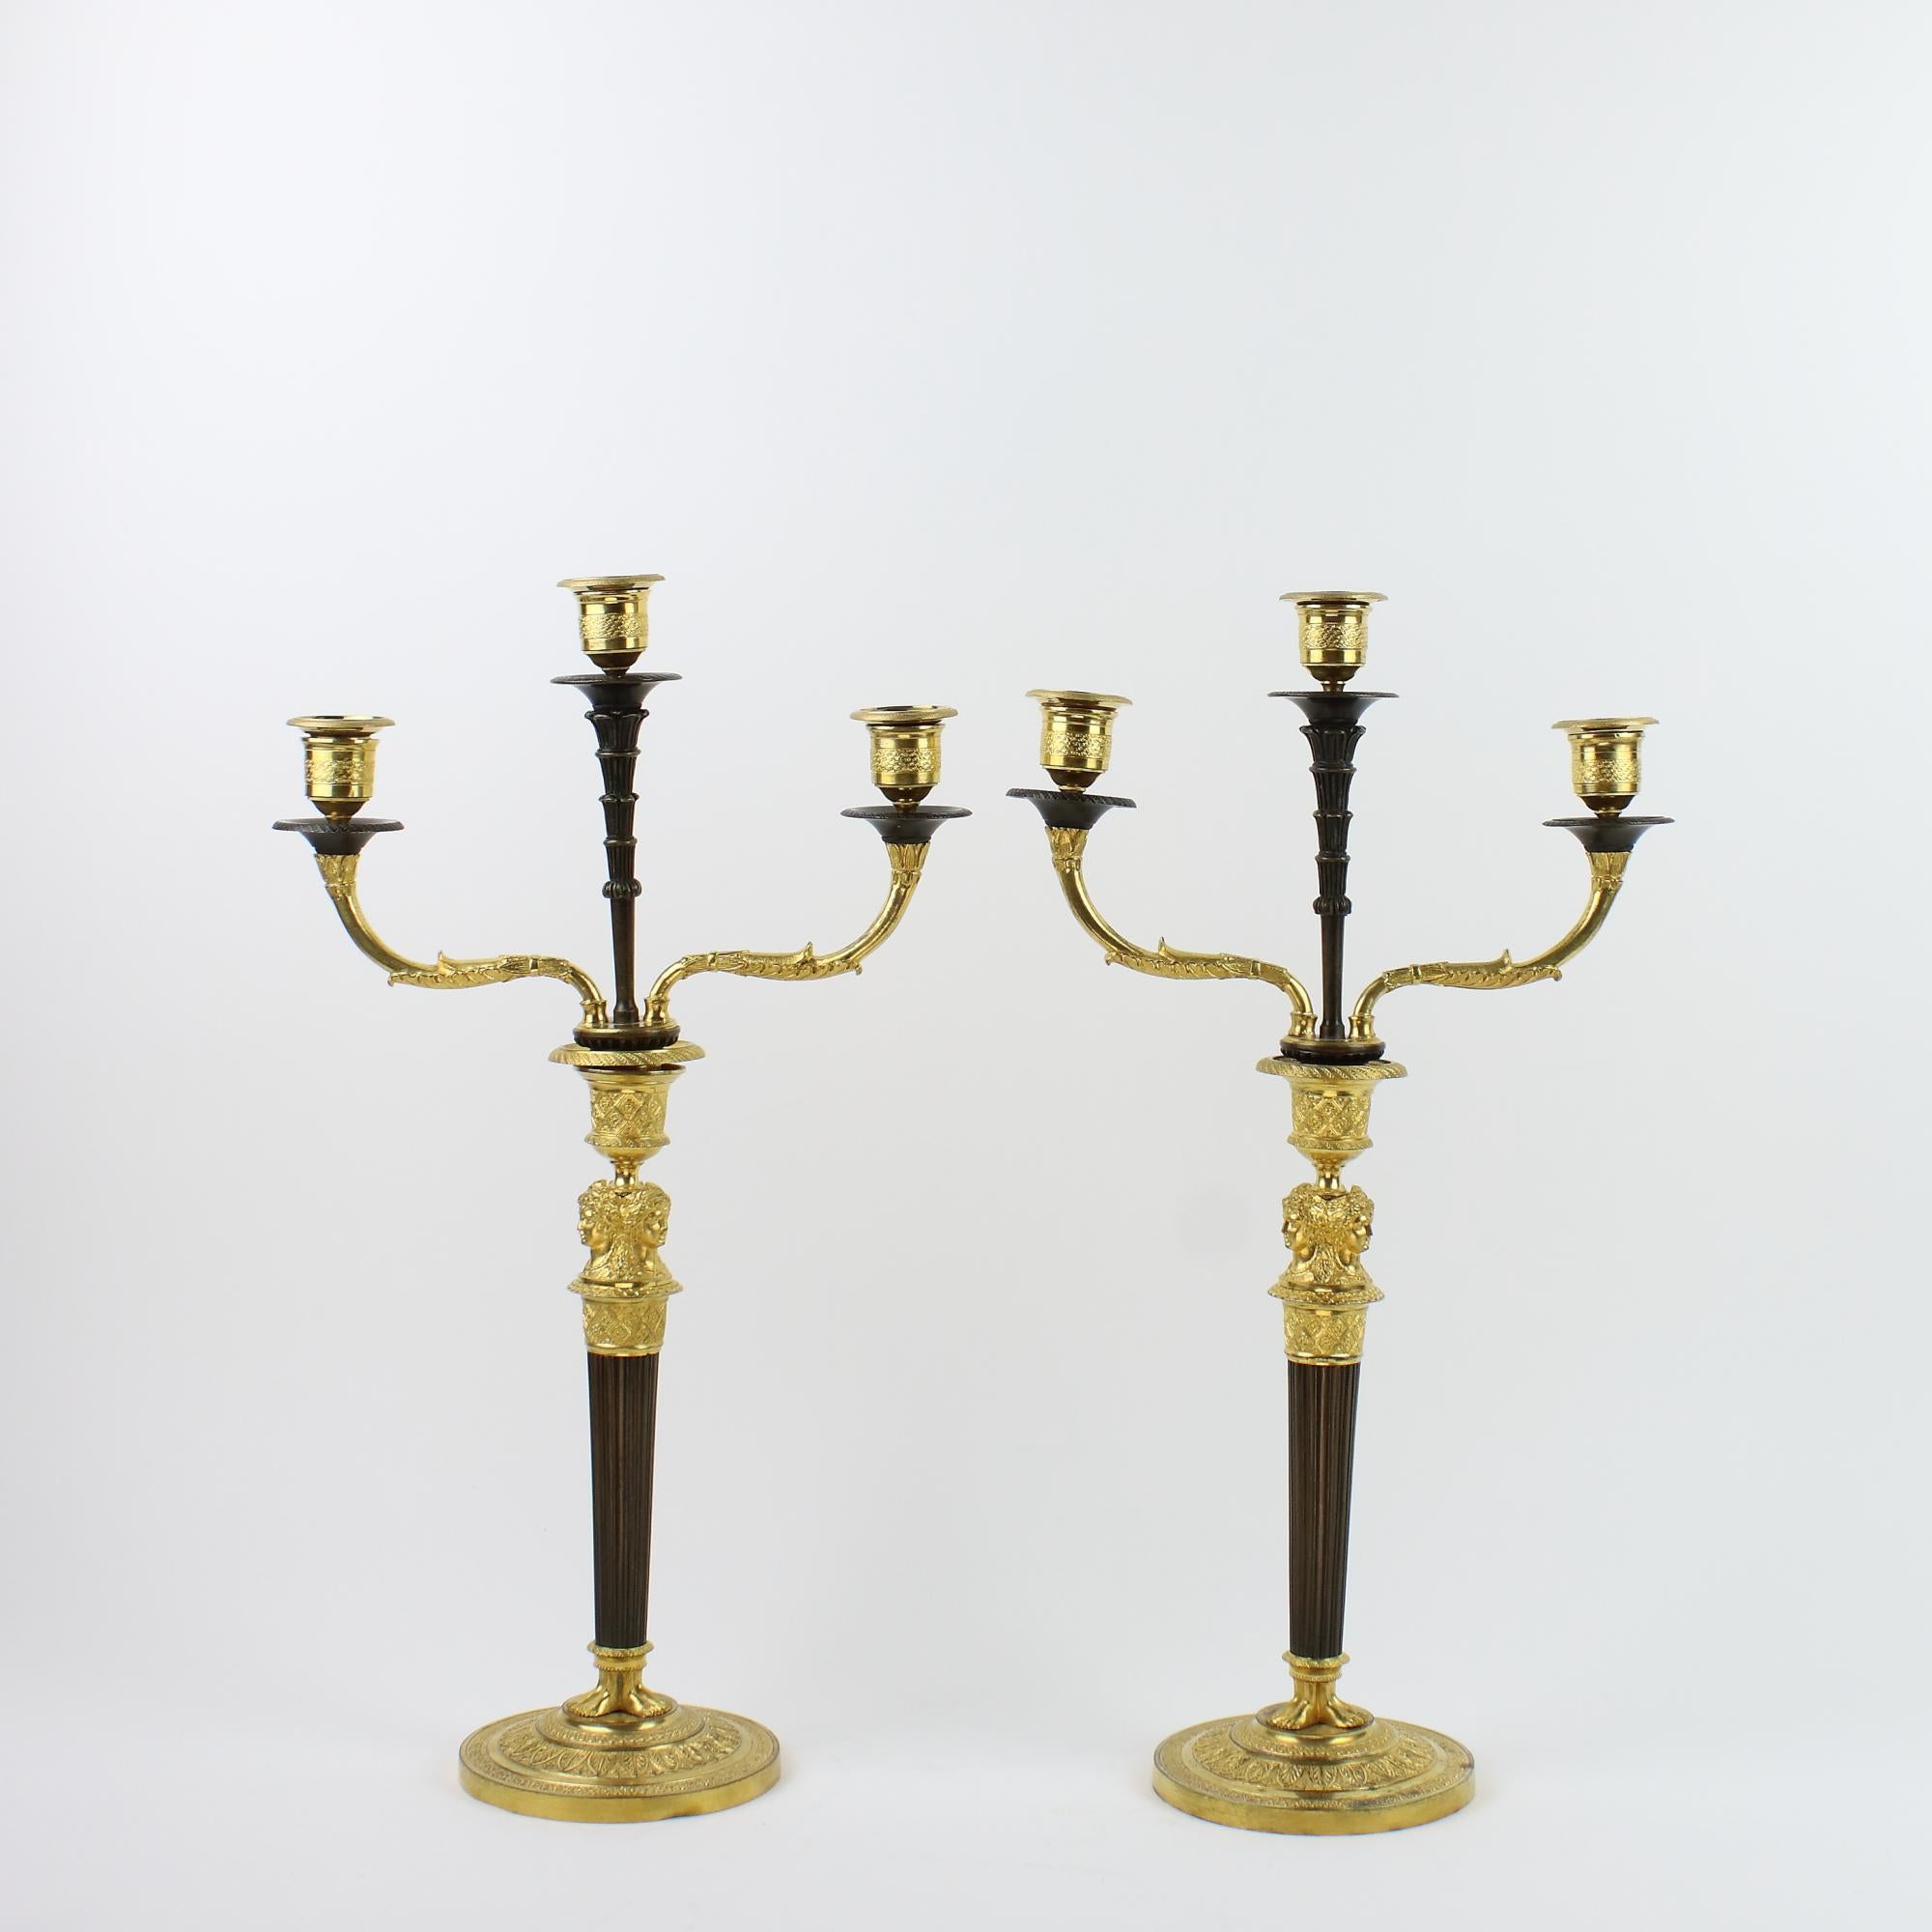 Early 19th Century Pair of Empire Bronze Female Caryatids Candelabras For Sale 2